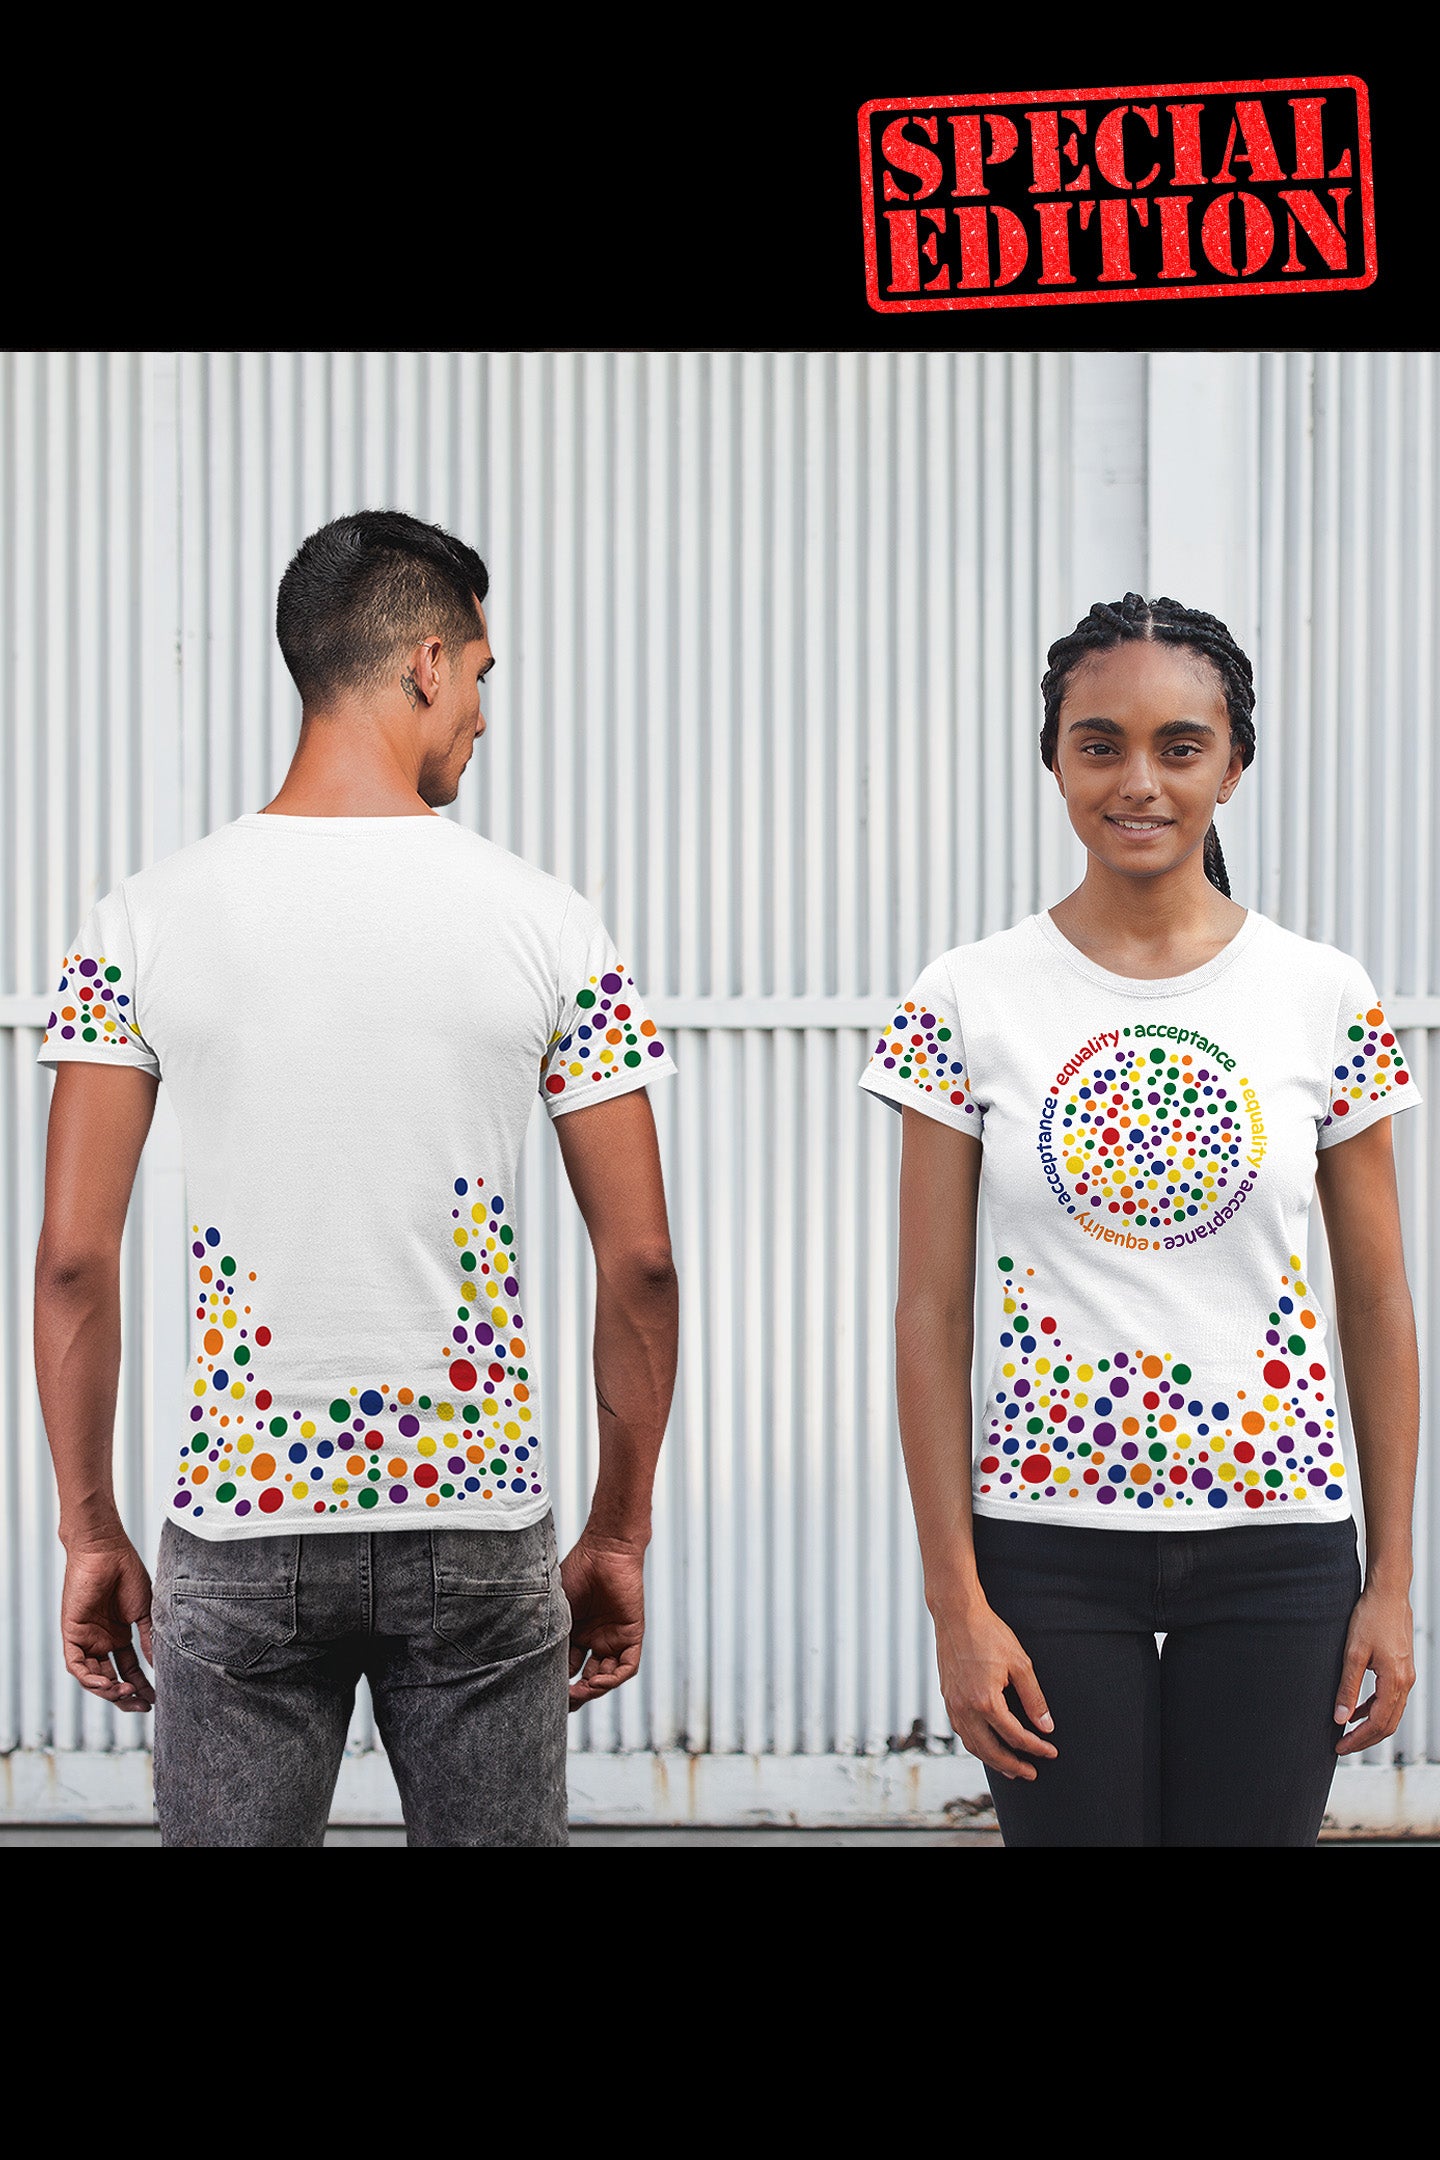 Designer Pride shirt, Special Edition - This gorgeous Unisex high quality allover print is our favoutire design!